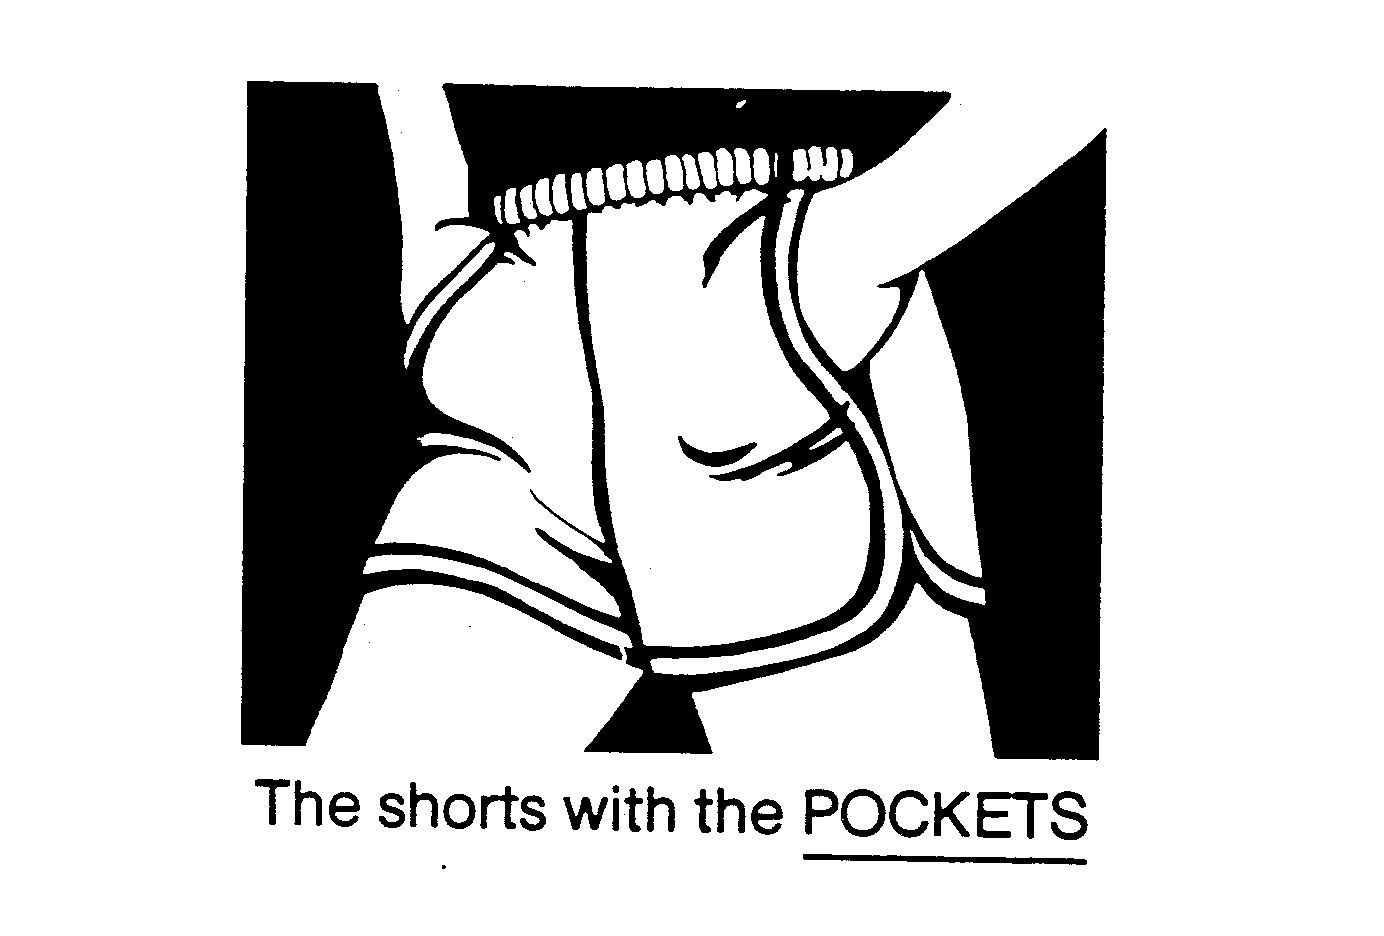  THE SHORTS WITH THE POCKETS